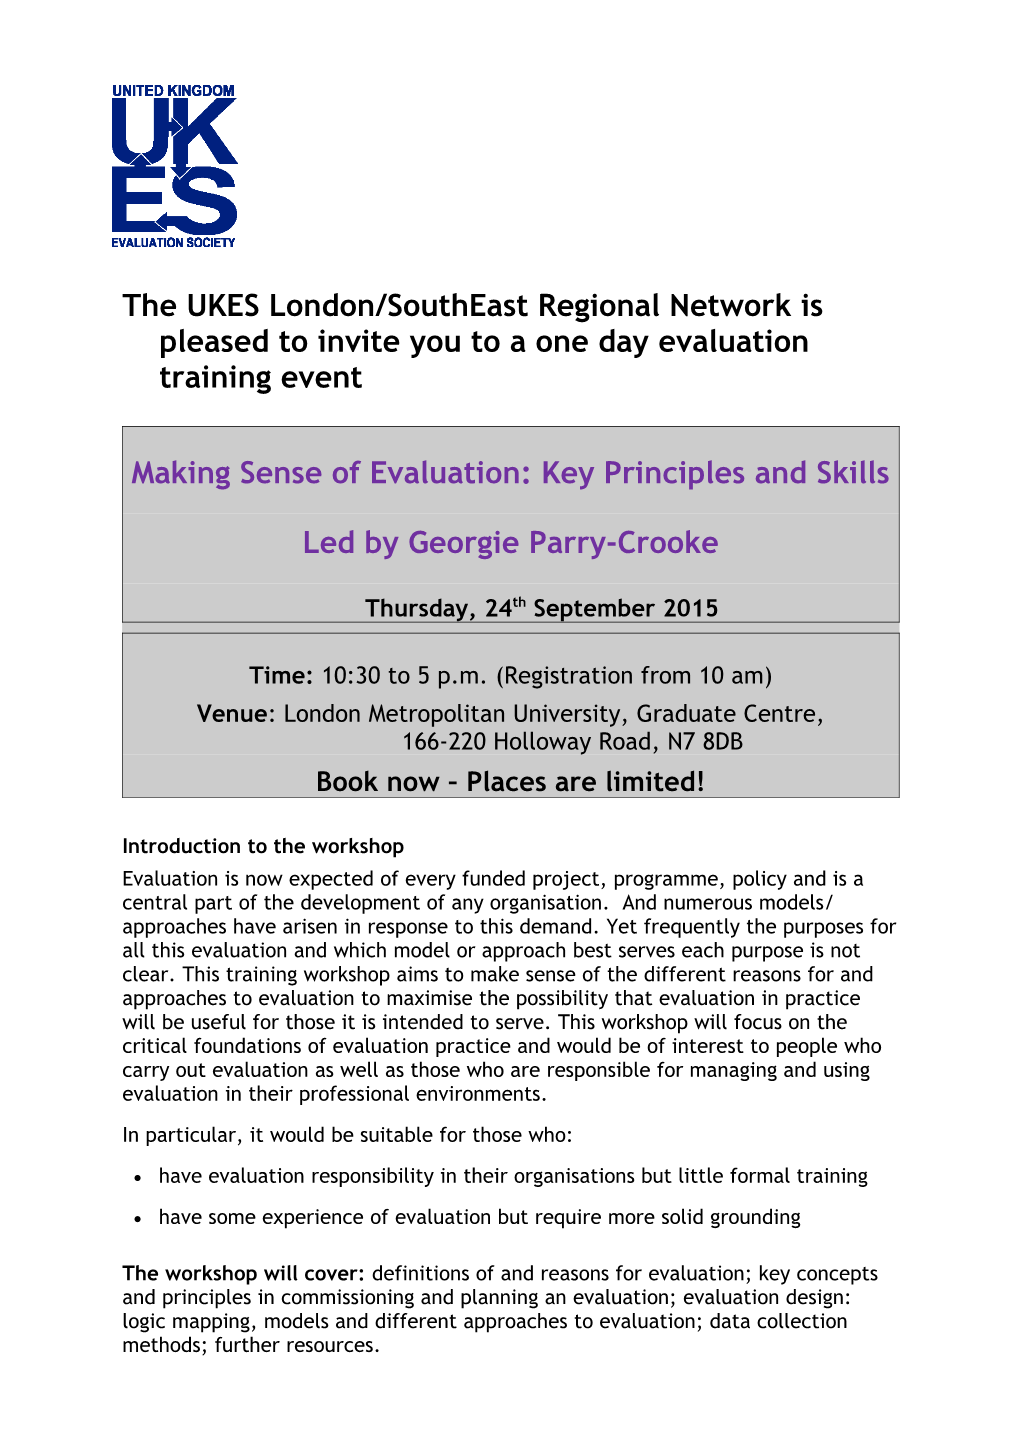 The UKES London/Southeast Regional Network Is Pleased to Invite You to a Oneday Evaluation